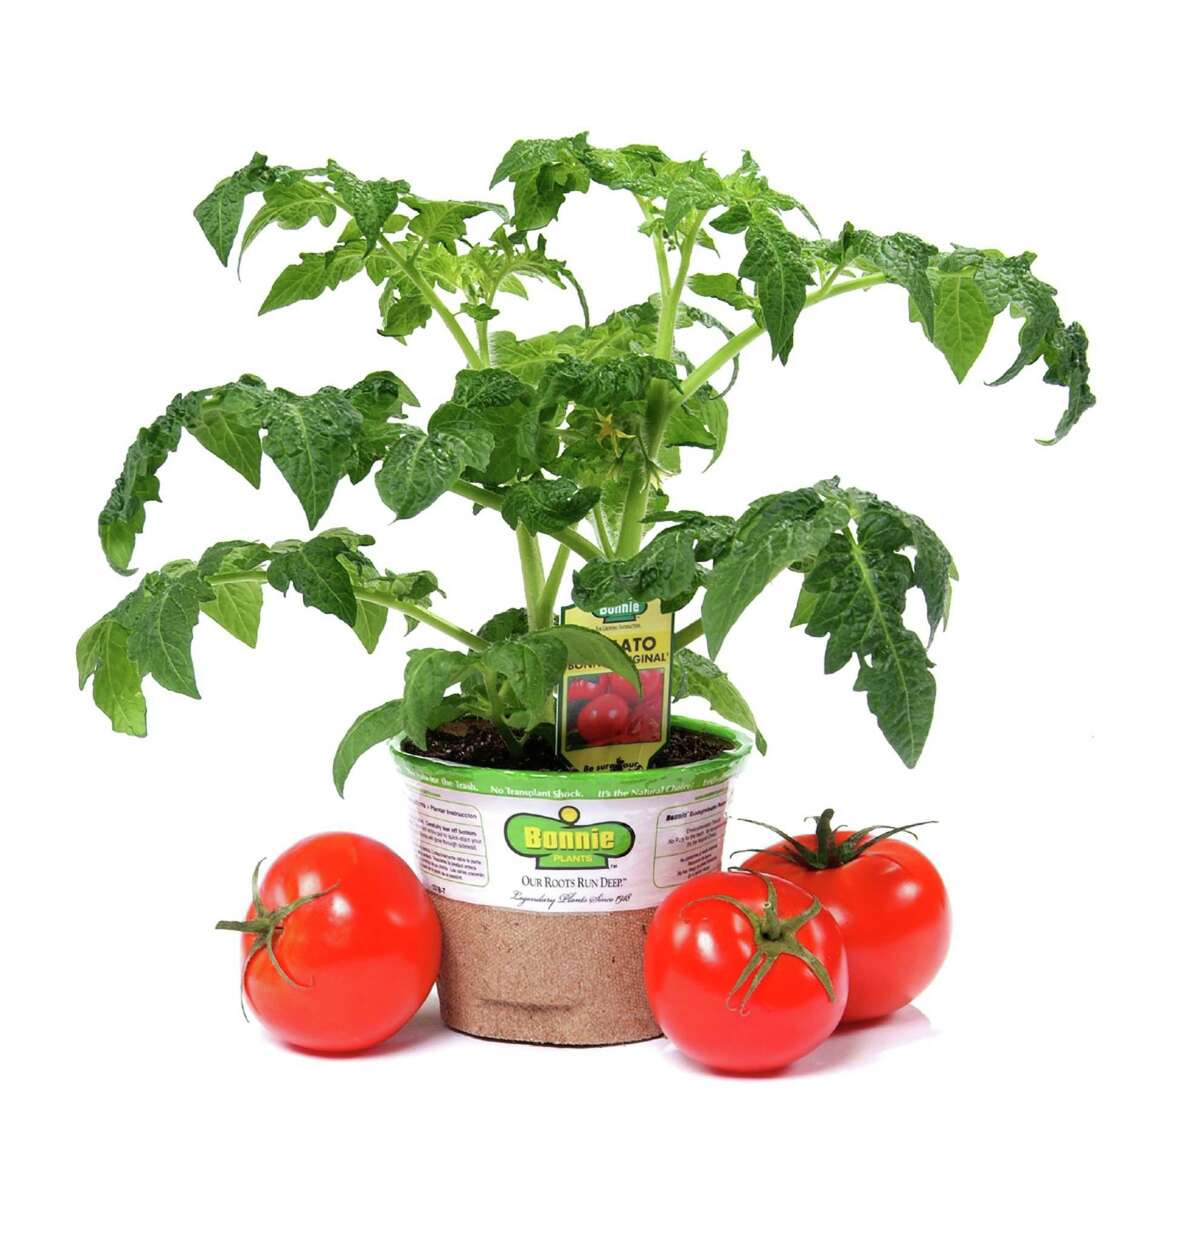 Bonnie Plants trucks vegetables and herbs in biodegradable pots to retail garden centers.